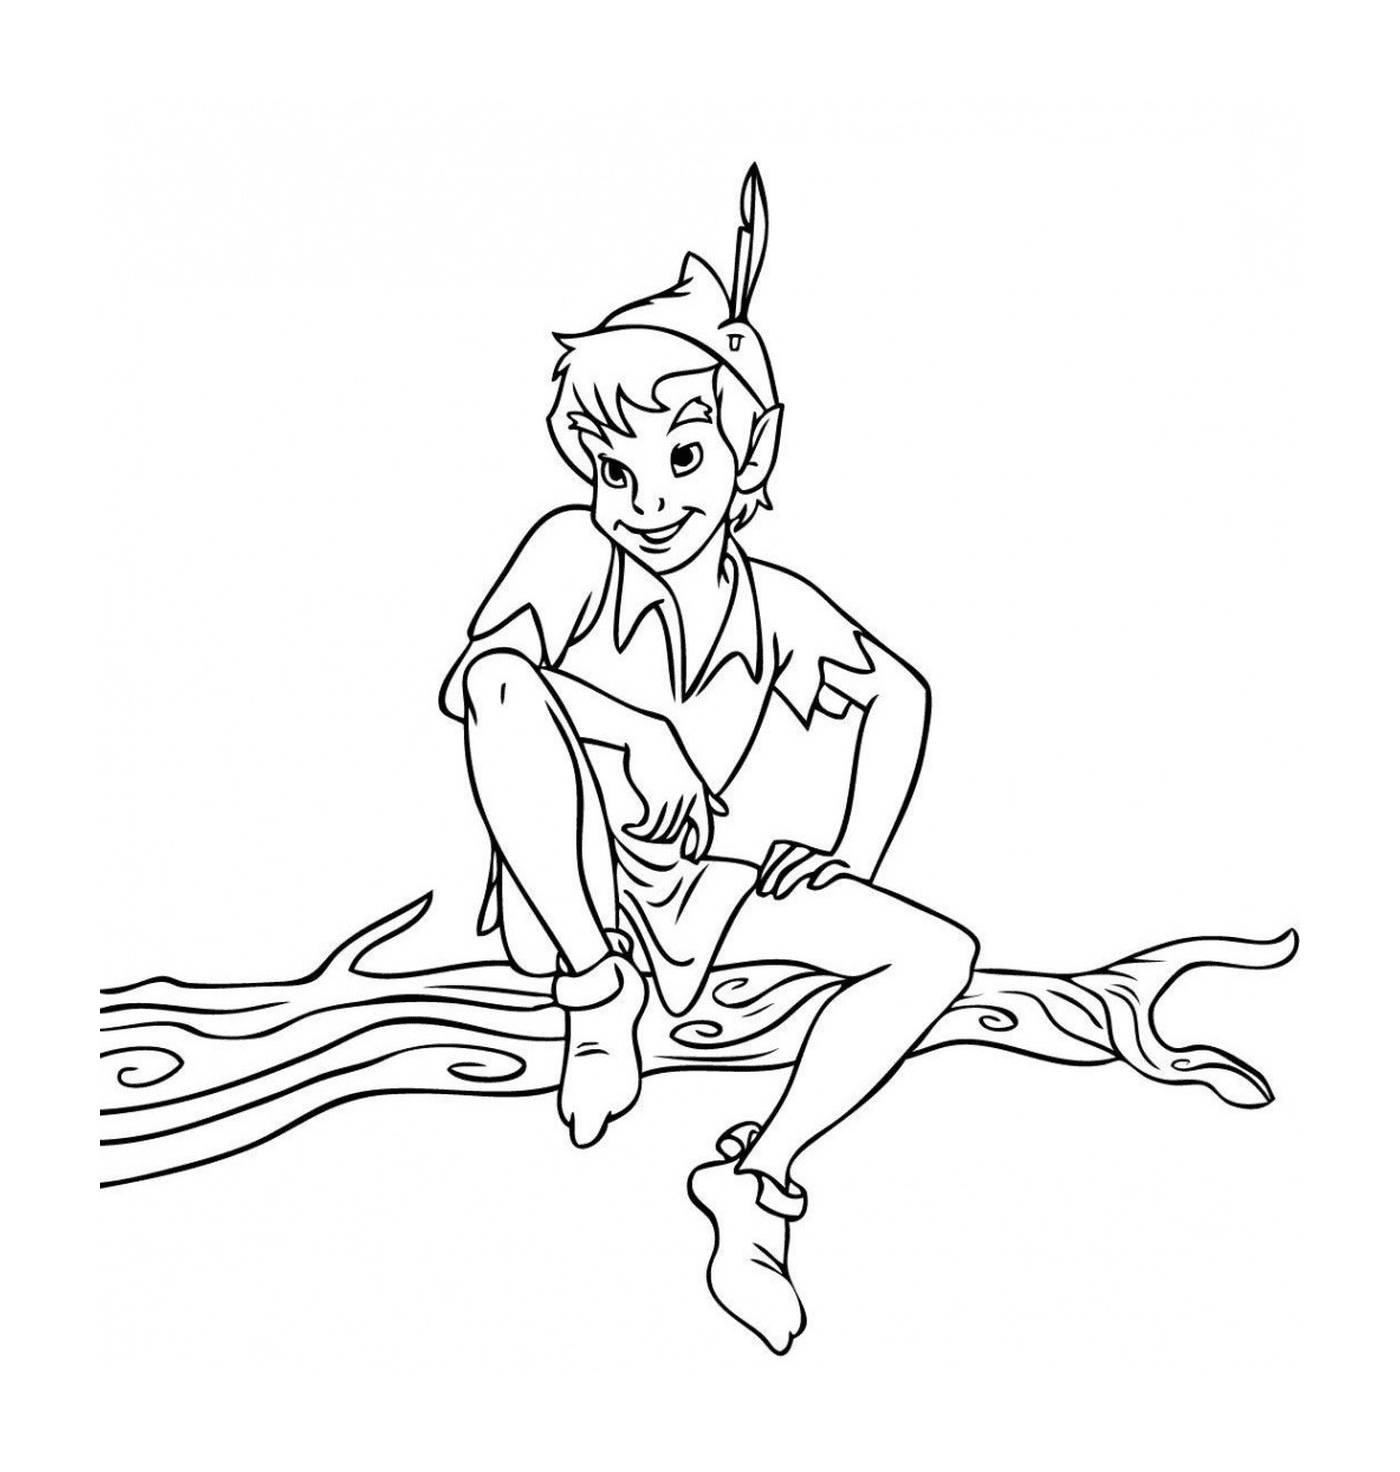  An adult of Peter Pan sitting on a tree branch 